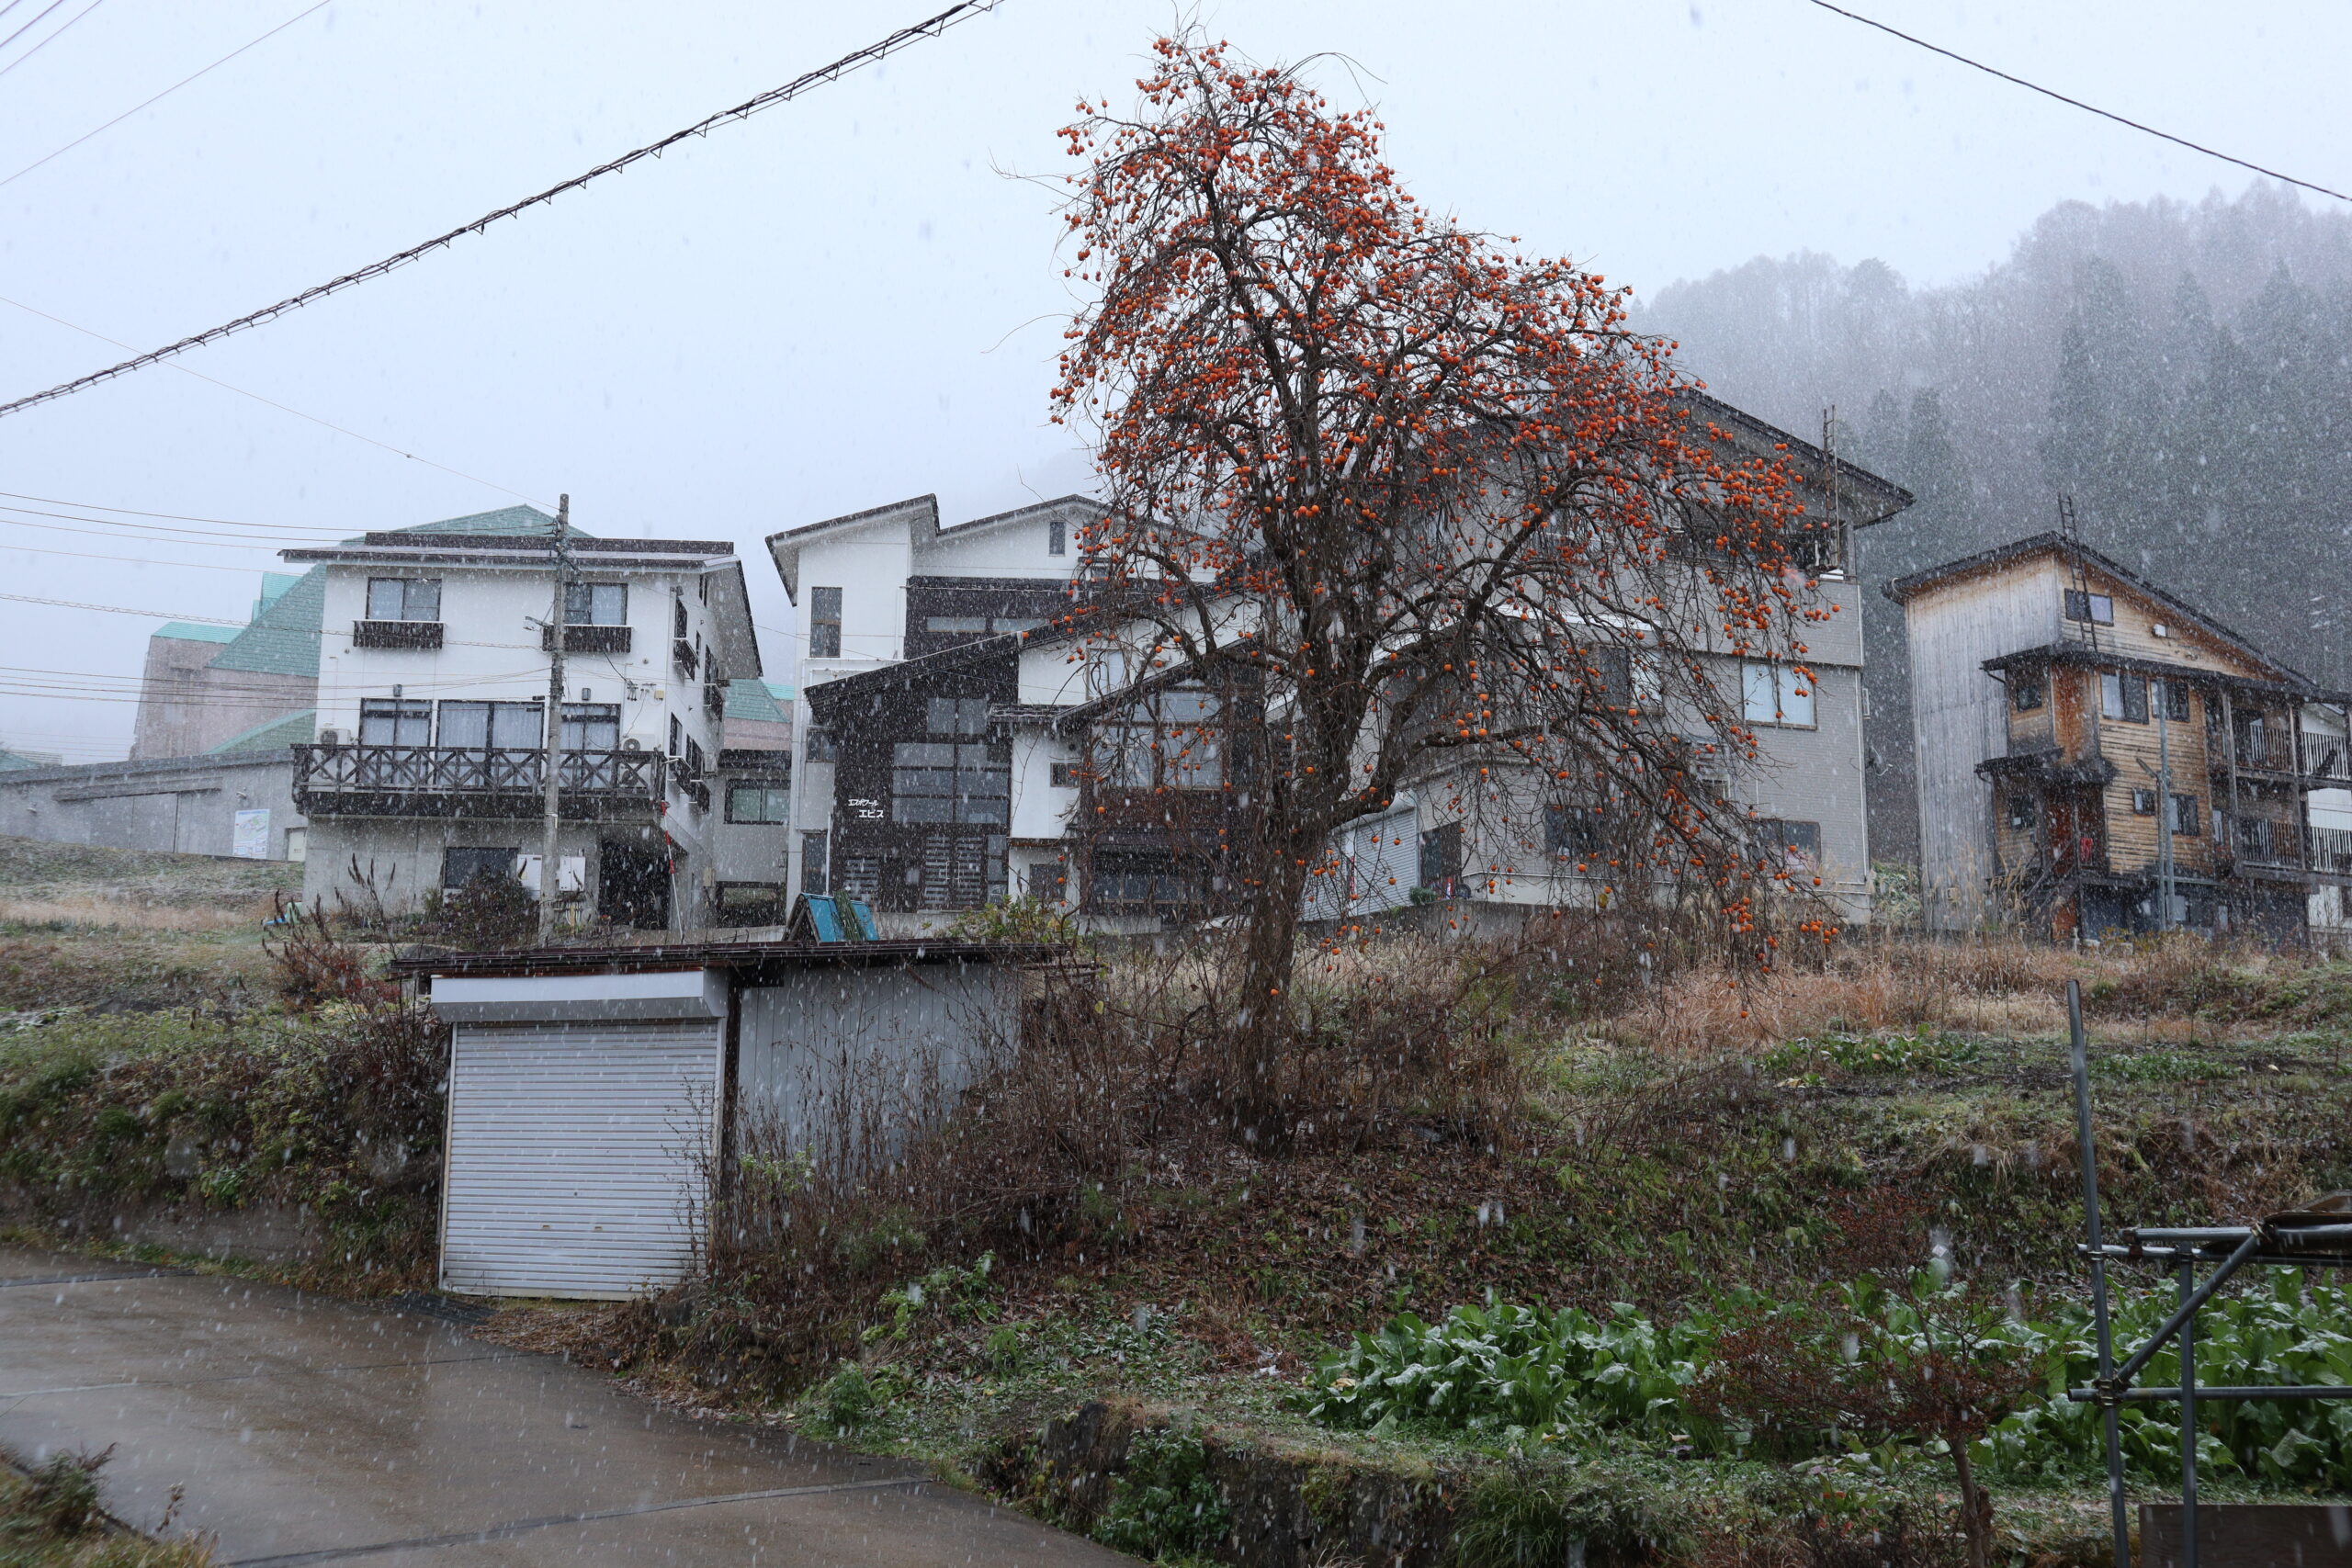 Nozawa Onsen sees the first snow this winter in the village.